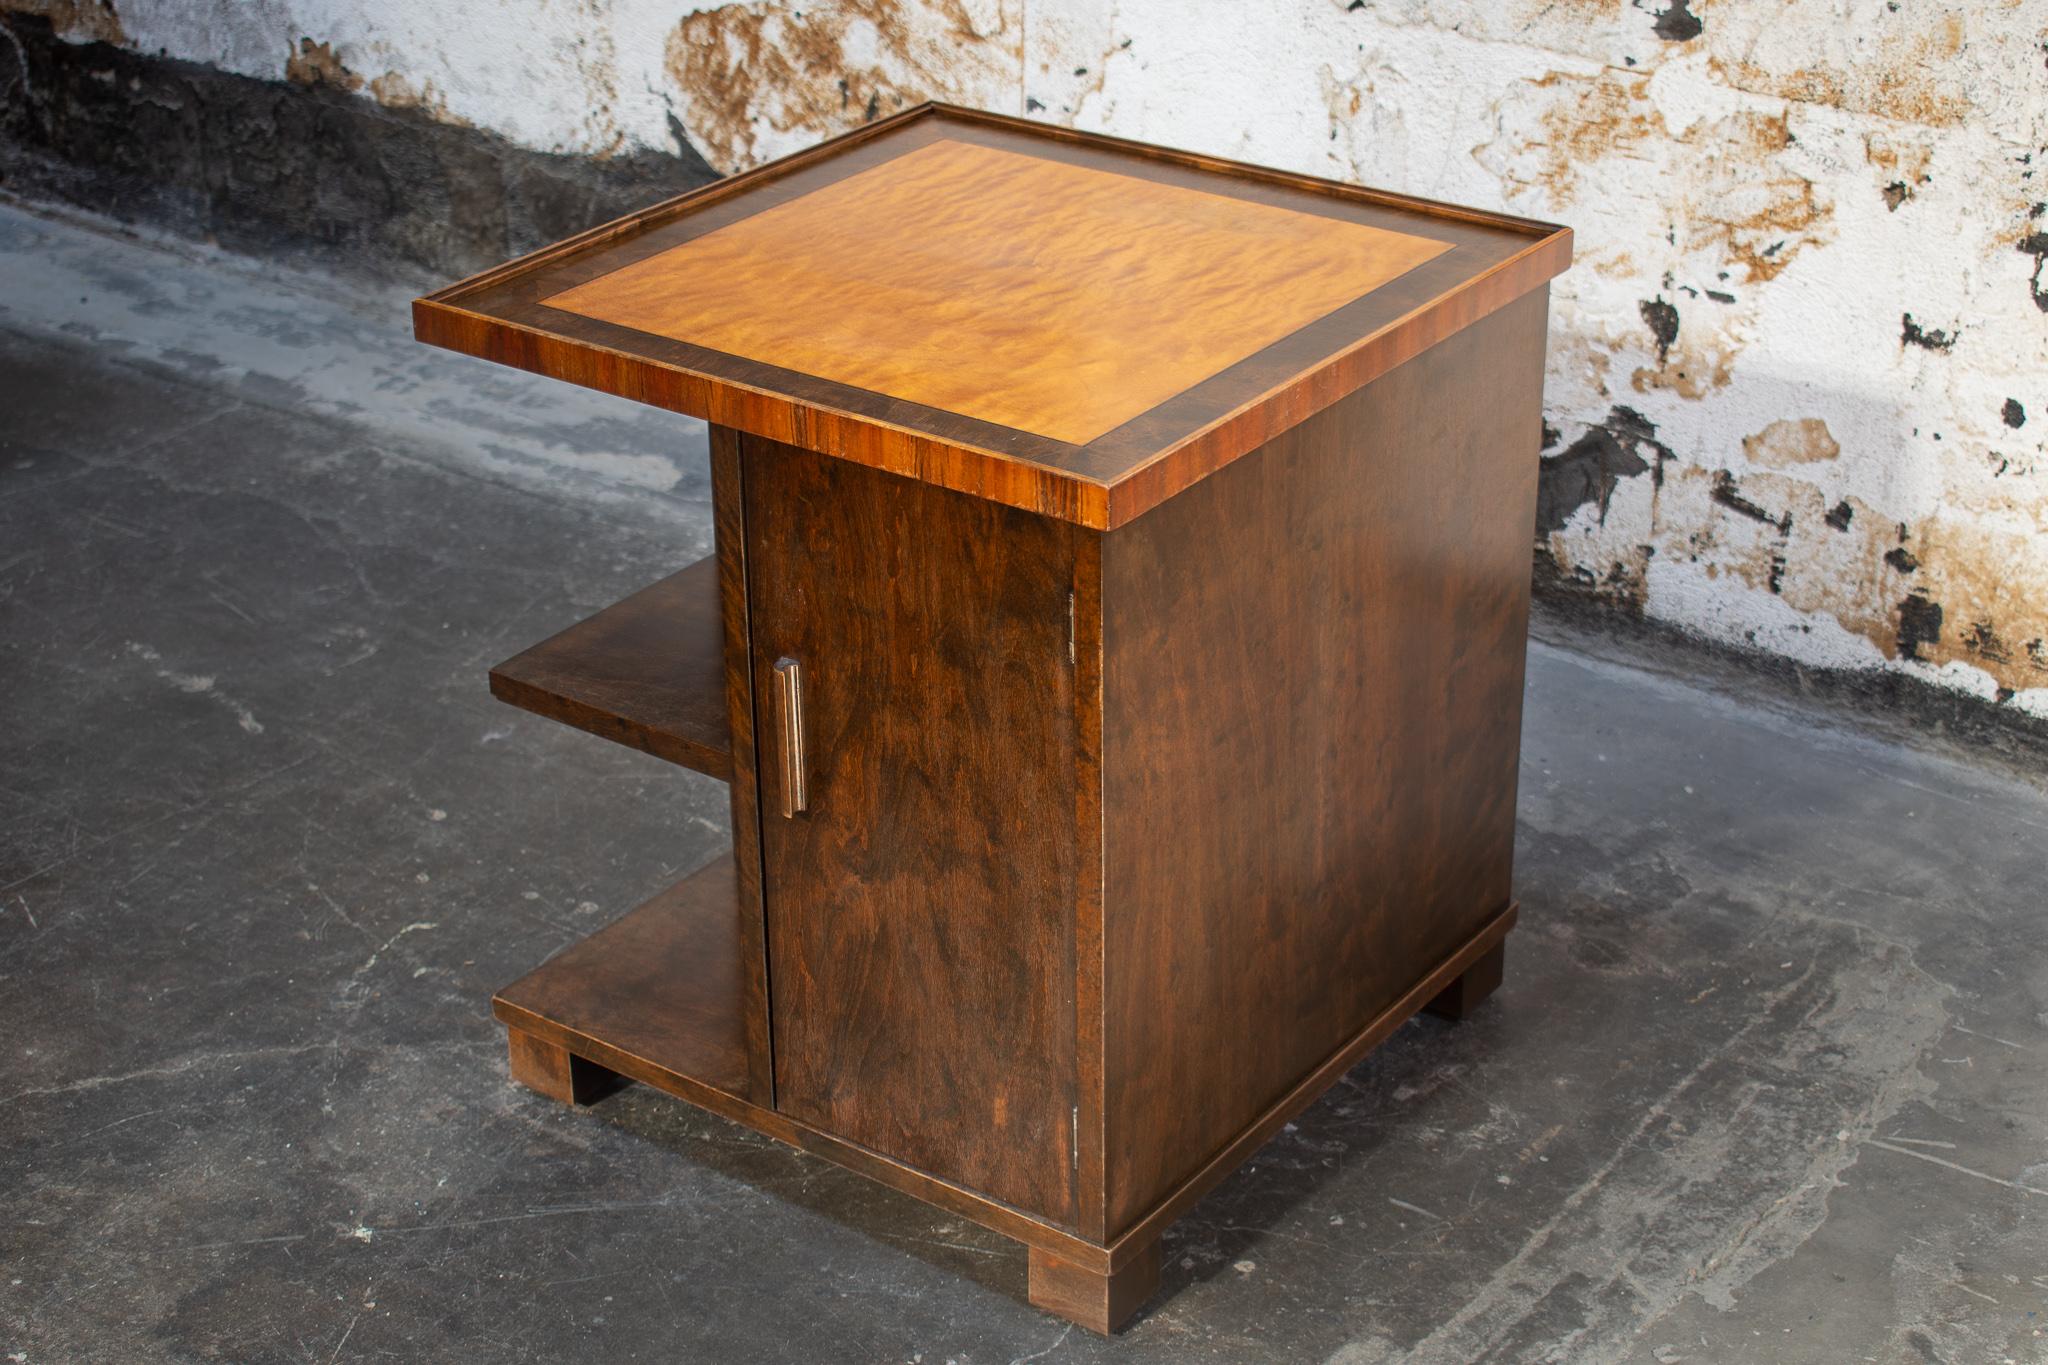 Handsome Art Deco Smoking Table in Swedish Birch with rosewood and elm Intarsia inlaid top. Perfect as a side table in an area that could also use additional storage and could also work as a low bedside table. This piece has an open shelf on one